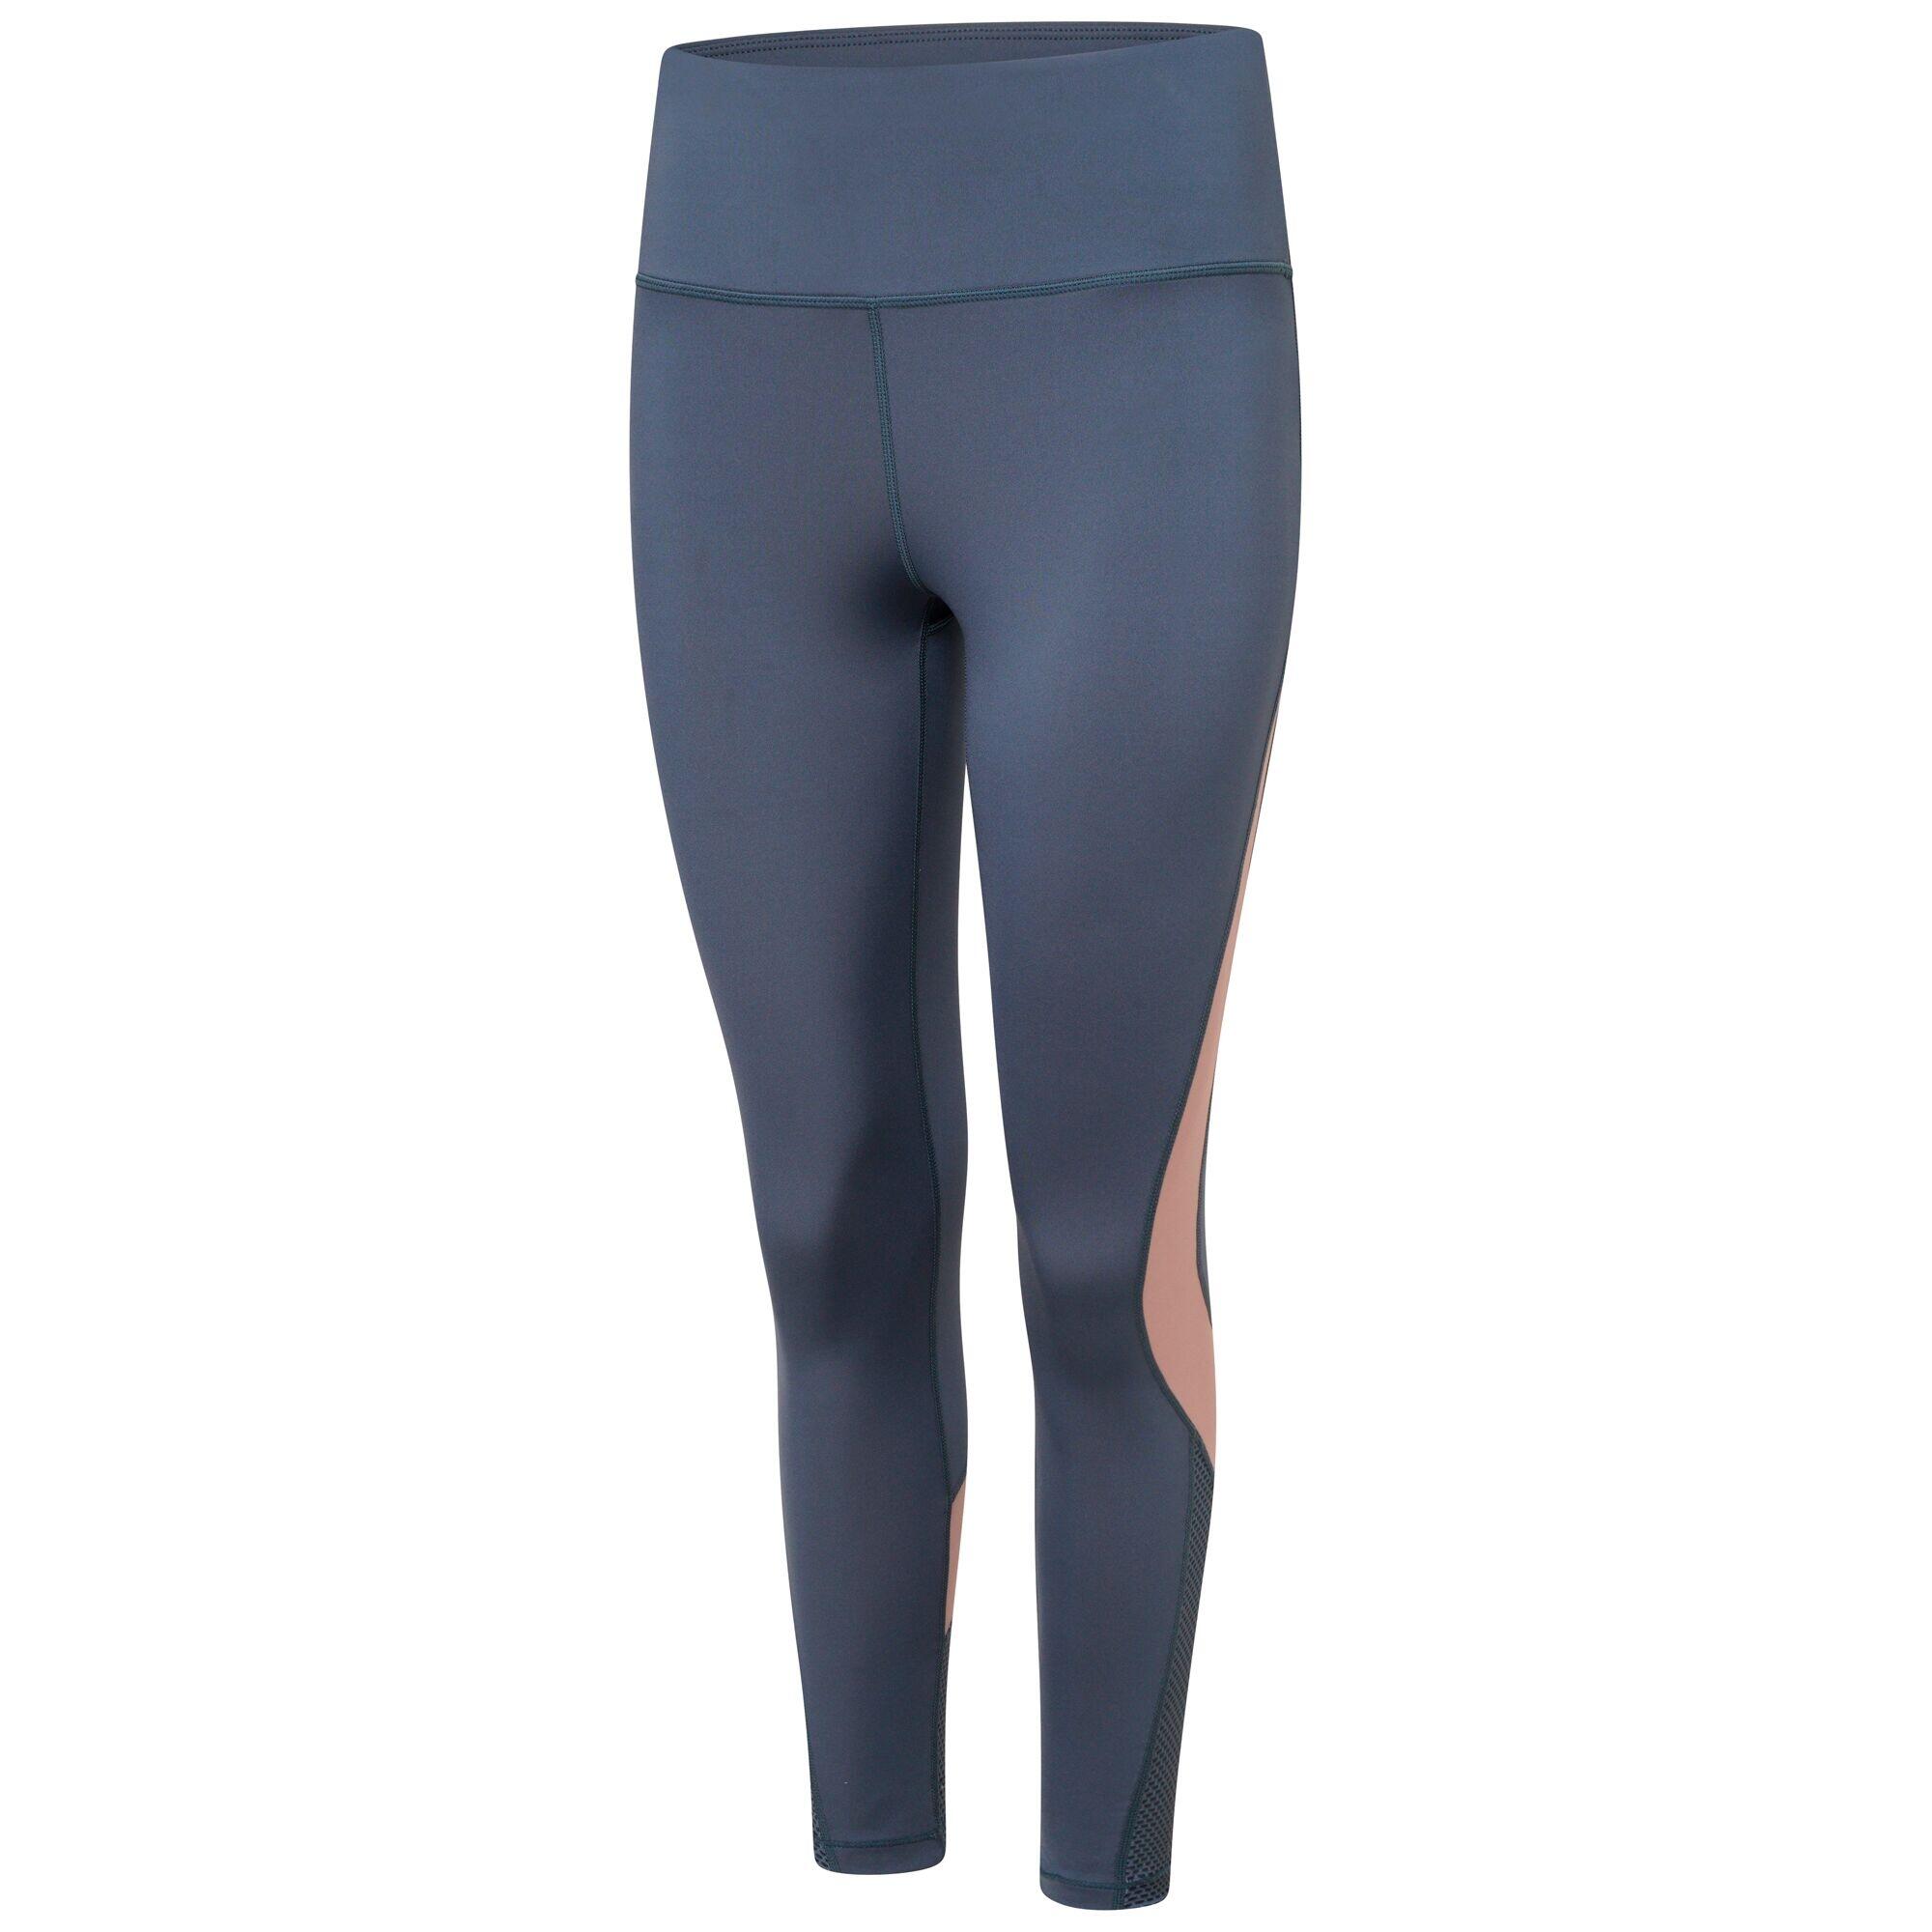 Womens/Ladies Move Fitness Leggings (Orion Grey/Dusty Rose) 3/4